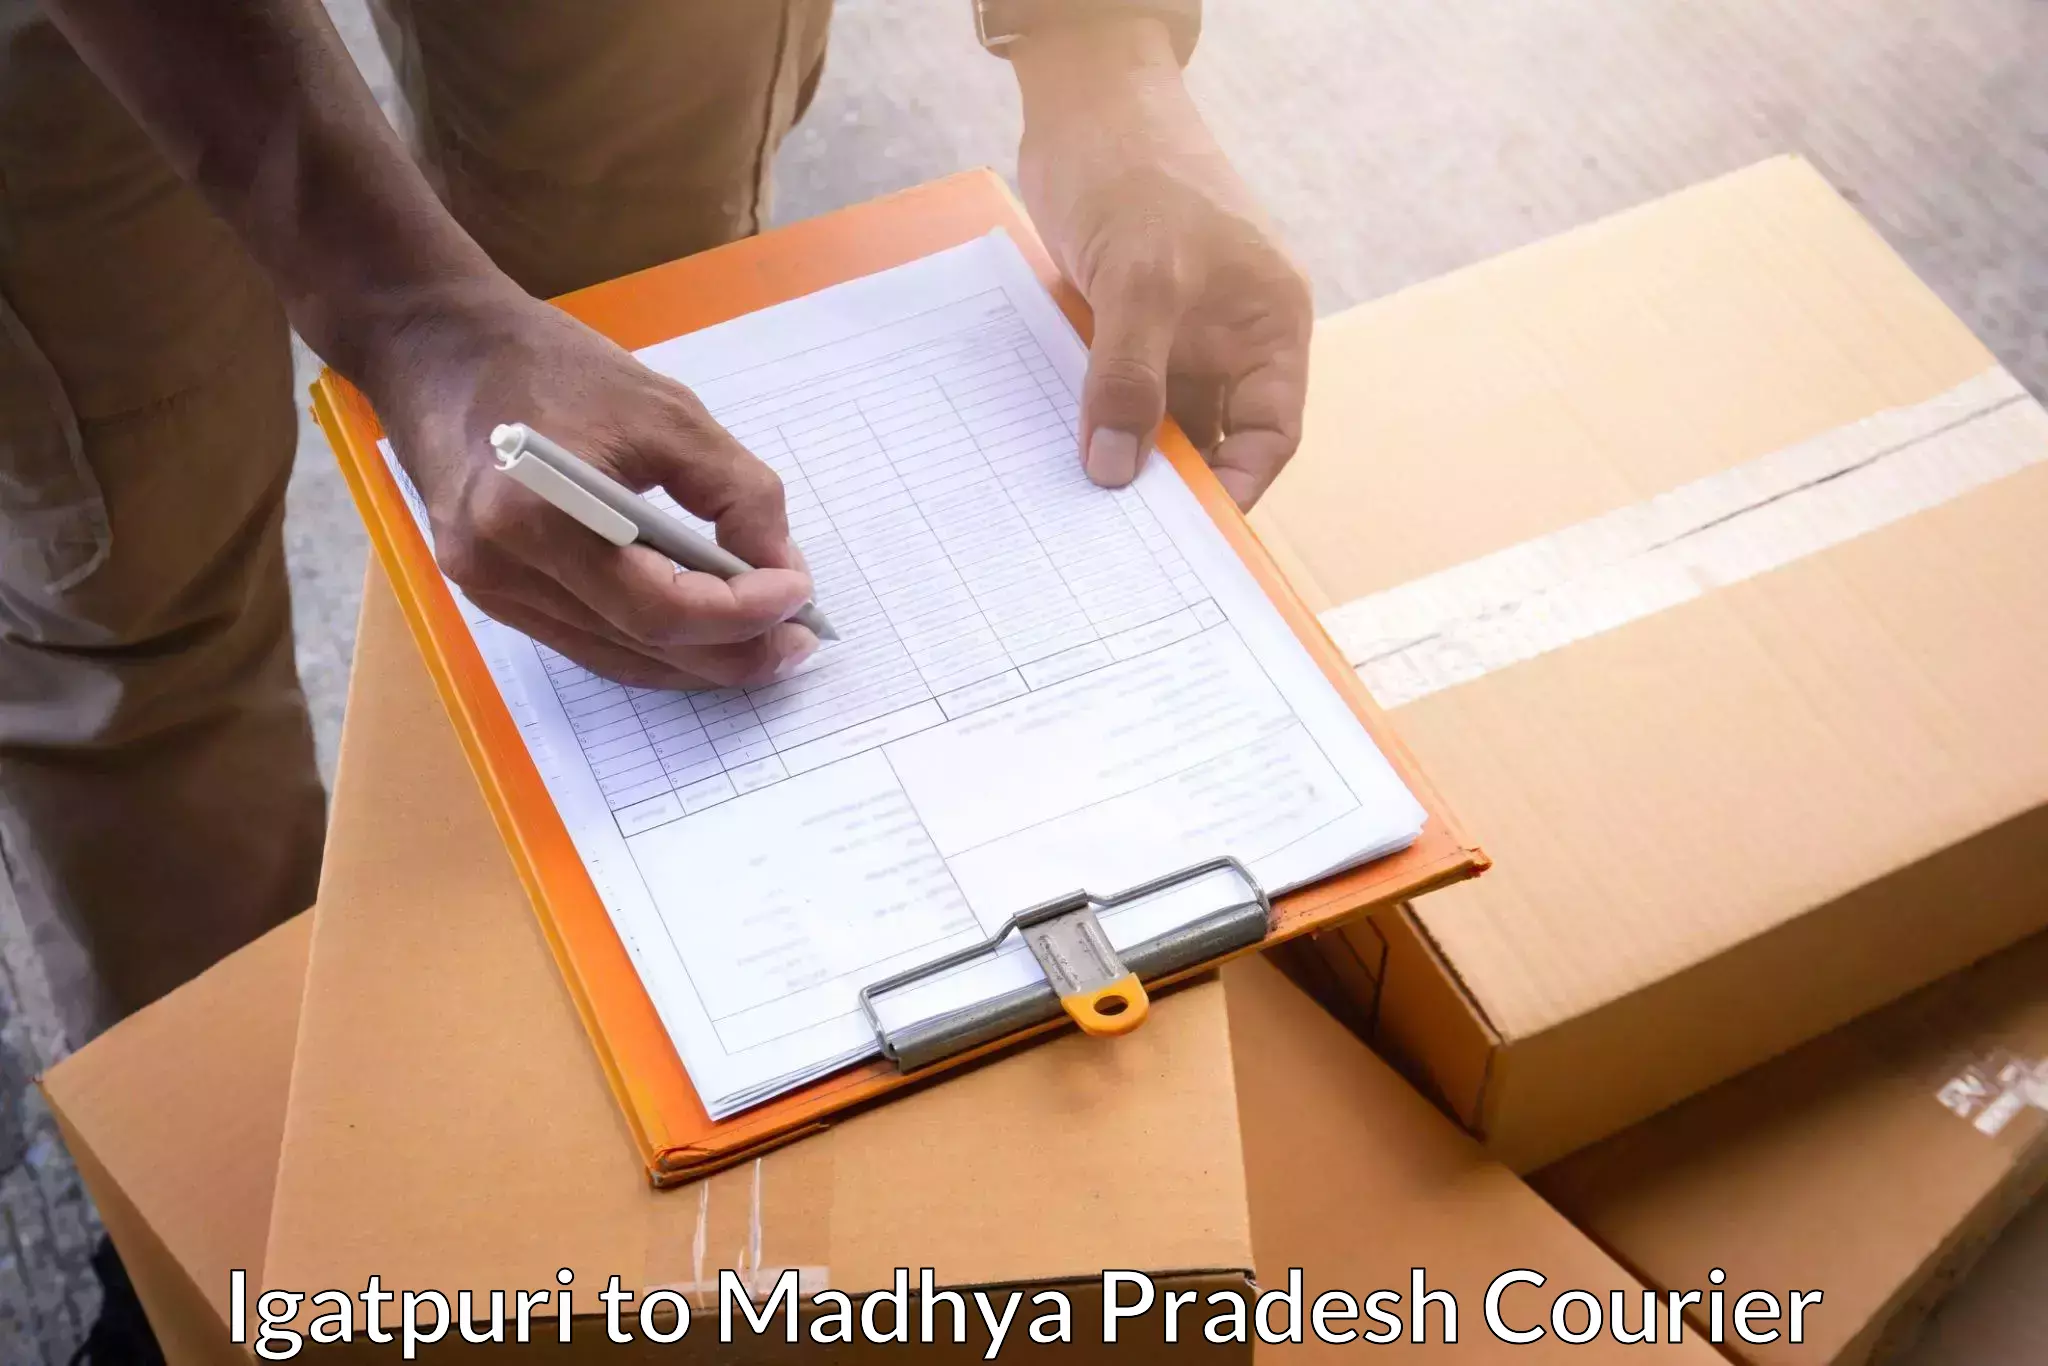 24/7 courier service in Igatpuri to Deotalab